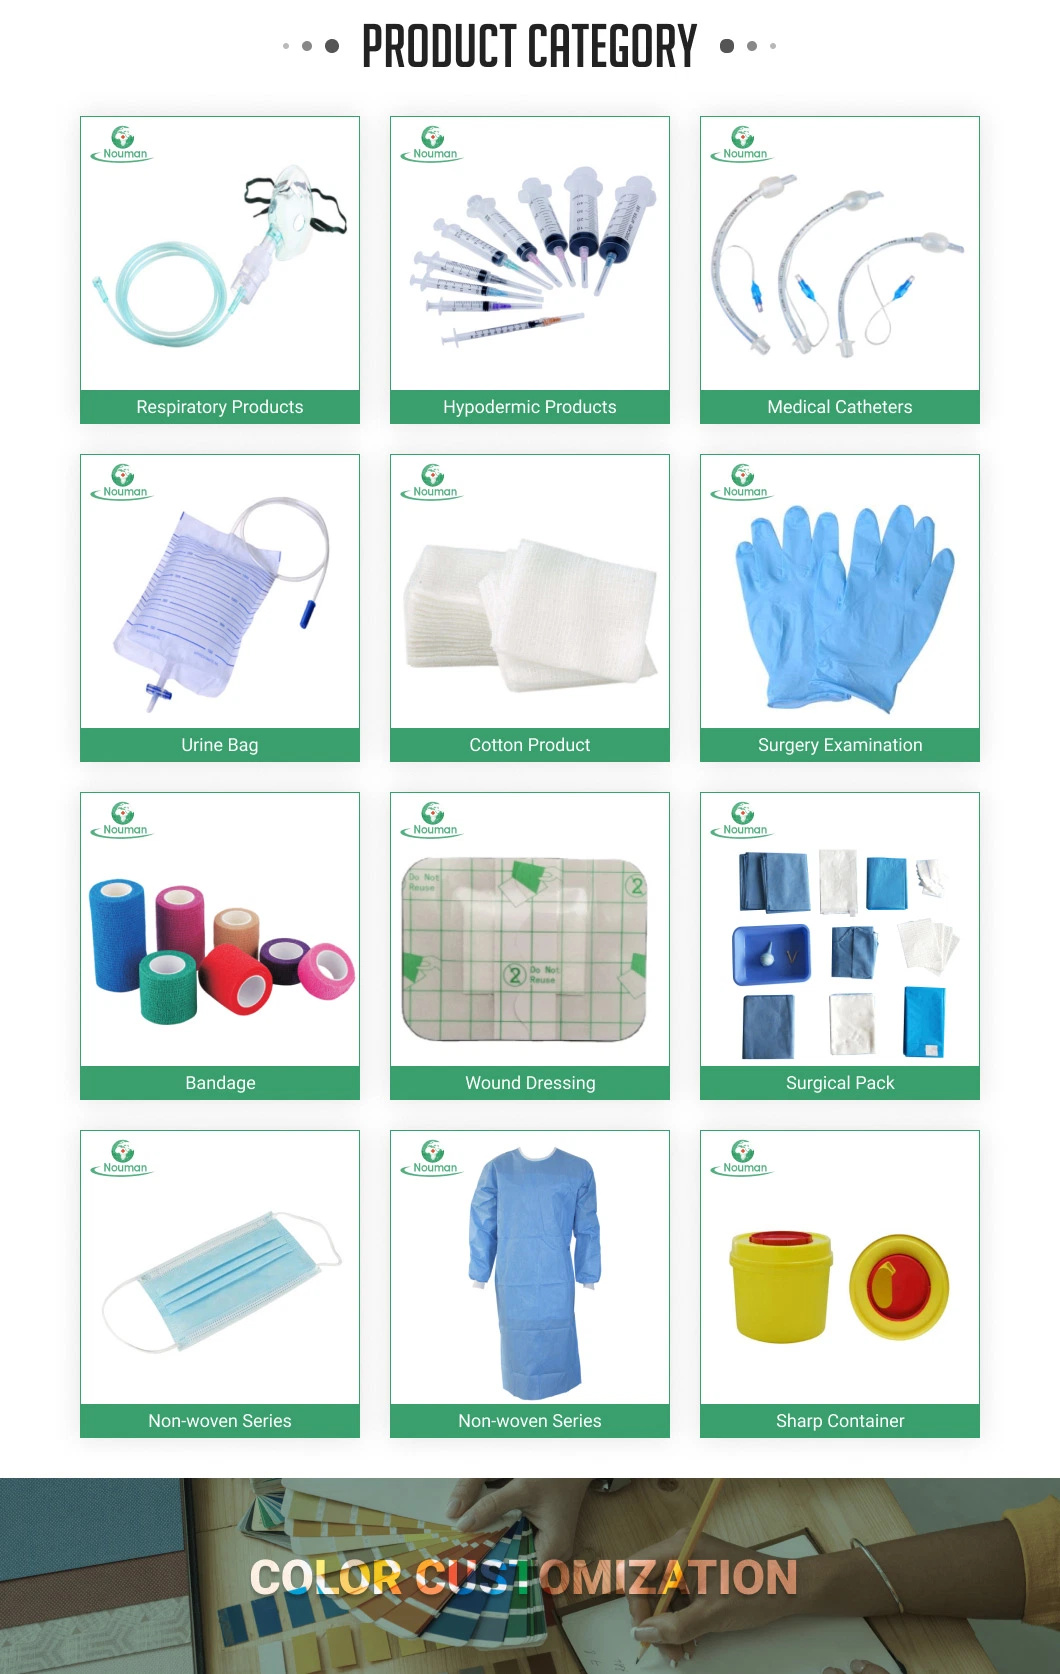 Medical Disposable O. R Cloth Face Towel Cotton Used in Operating Rooms